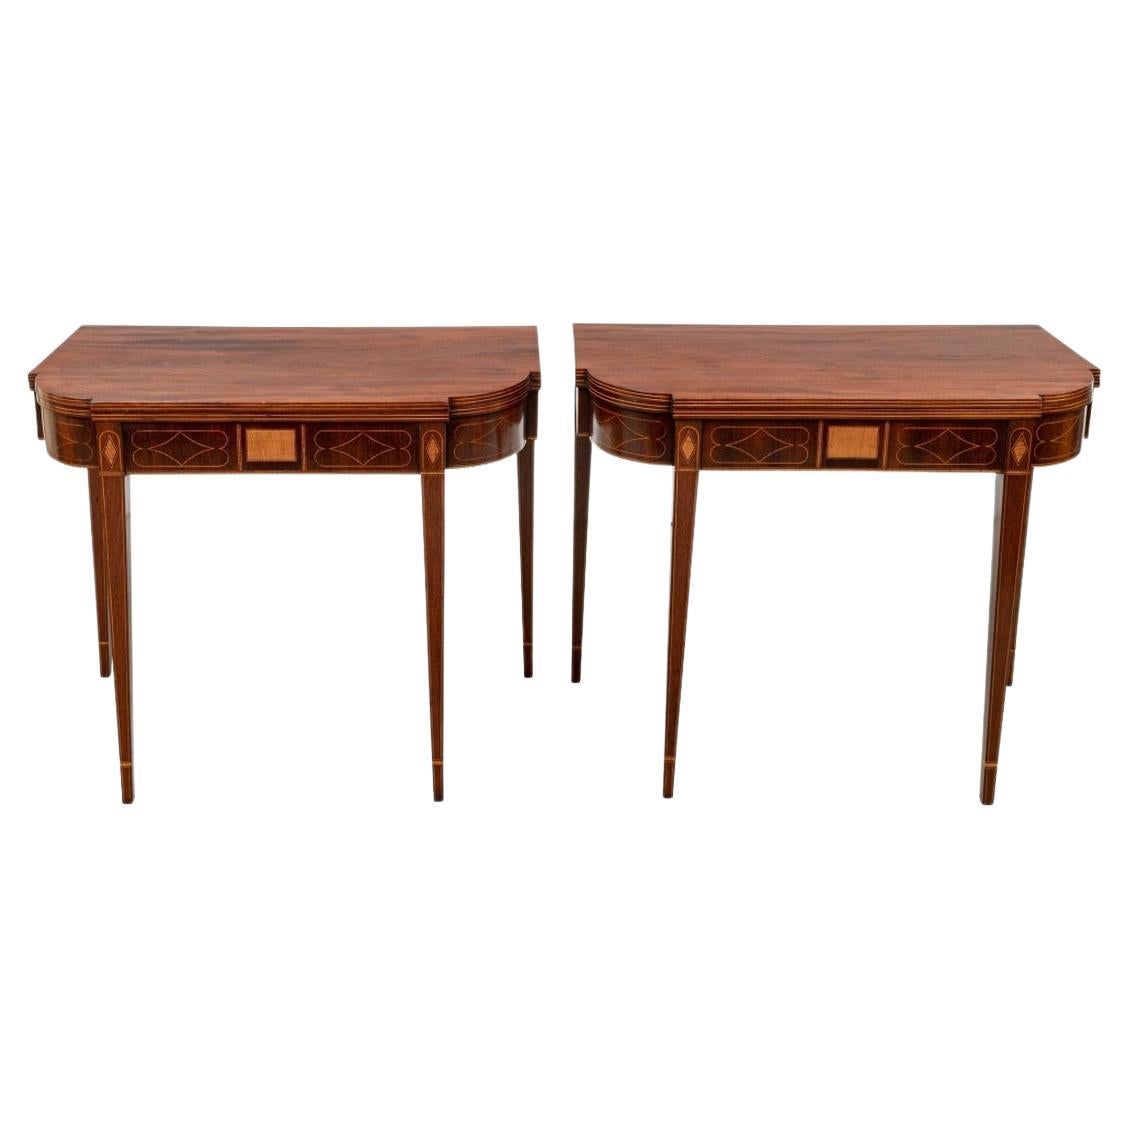 Extraordinary Pair of Fine Period Federal Inlaid Mahogany Console Tables For Sale